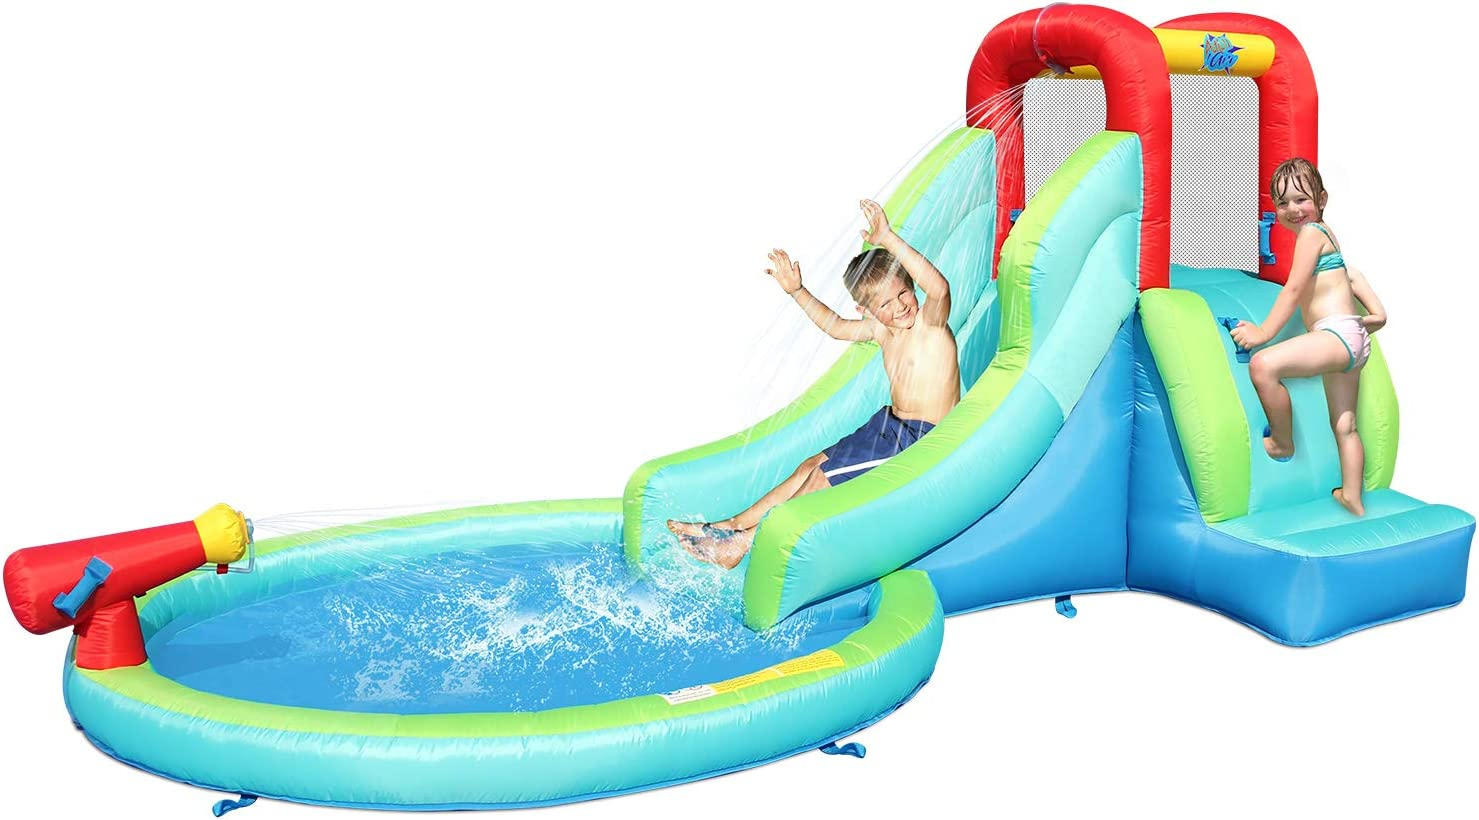 Action Air Water Slides For Kids Are A Fun Summertime Activity